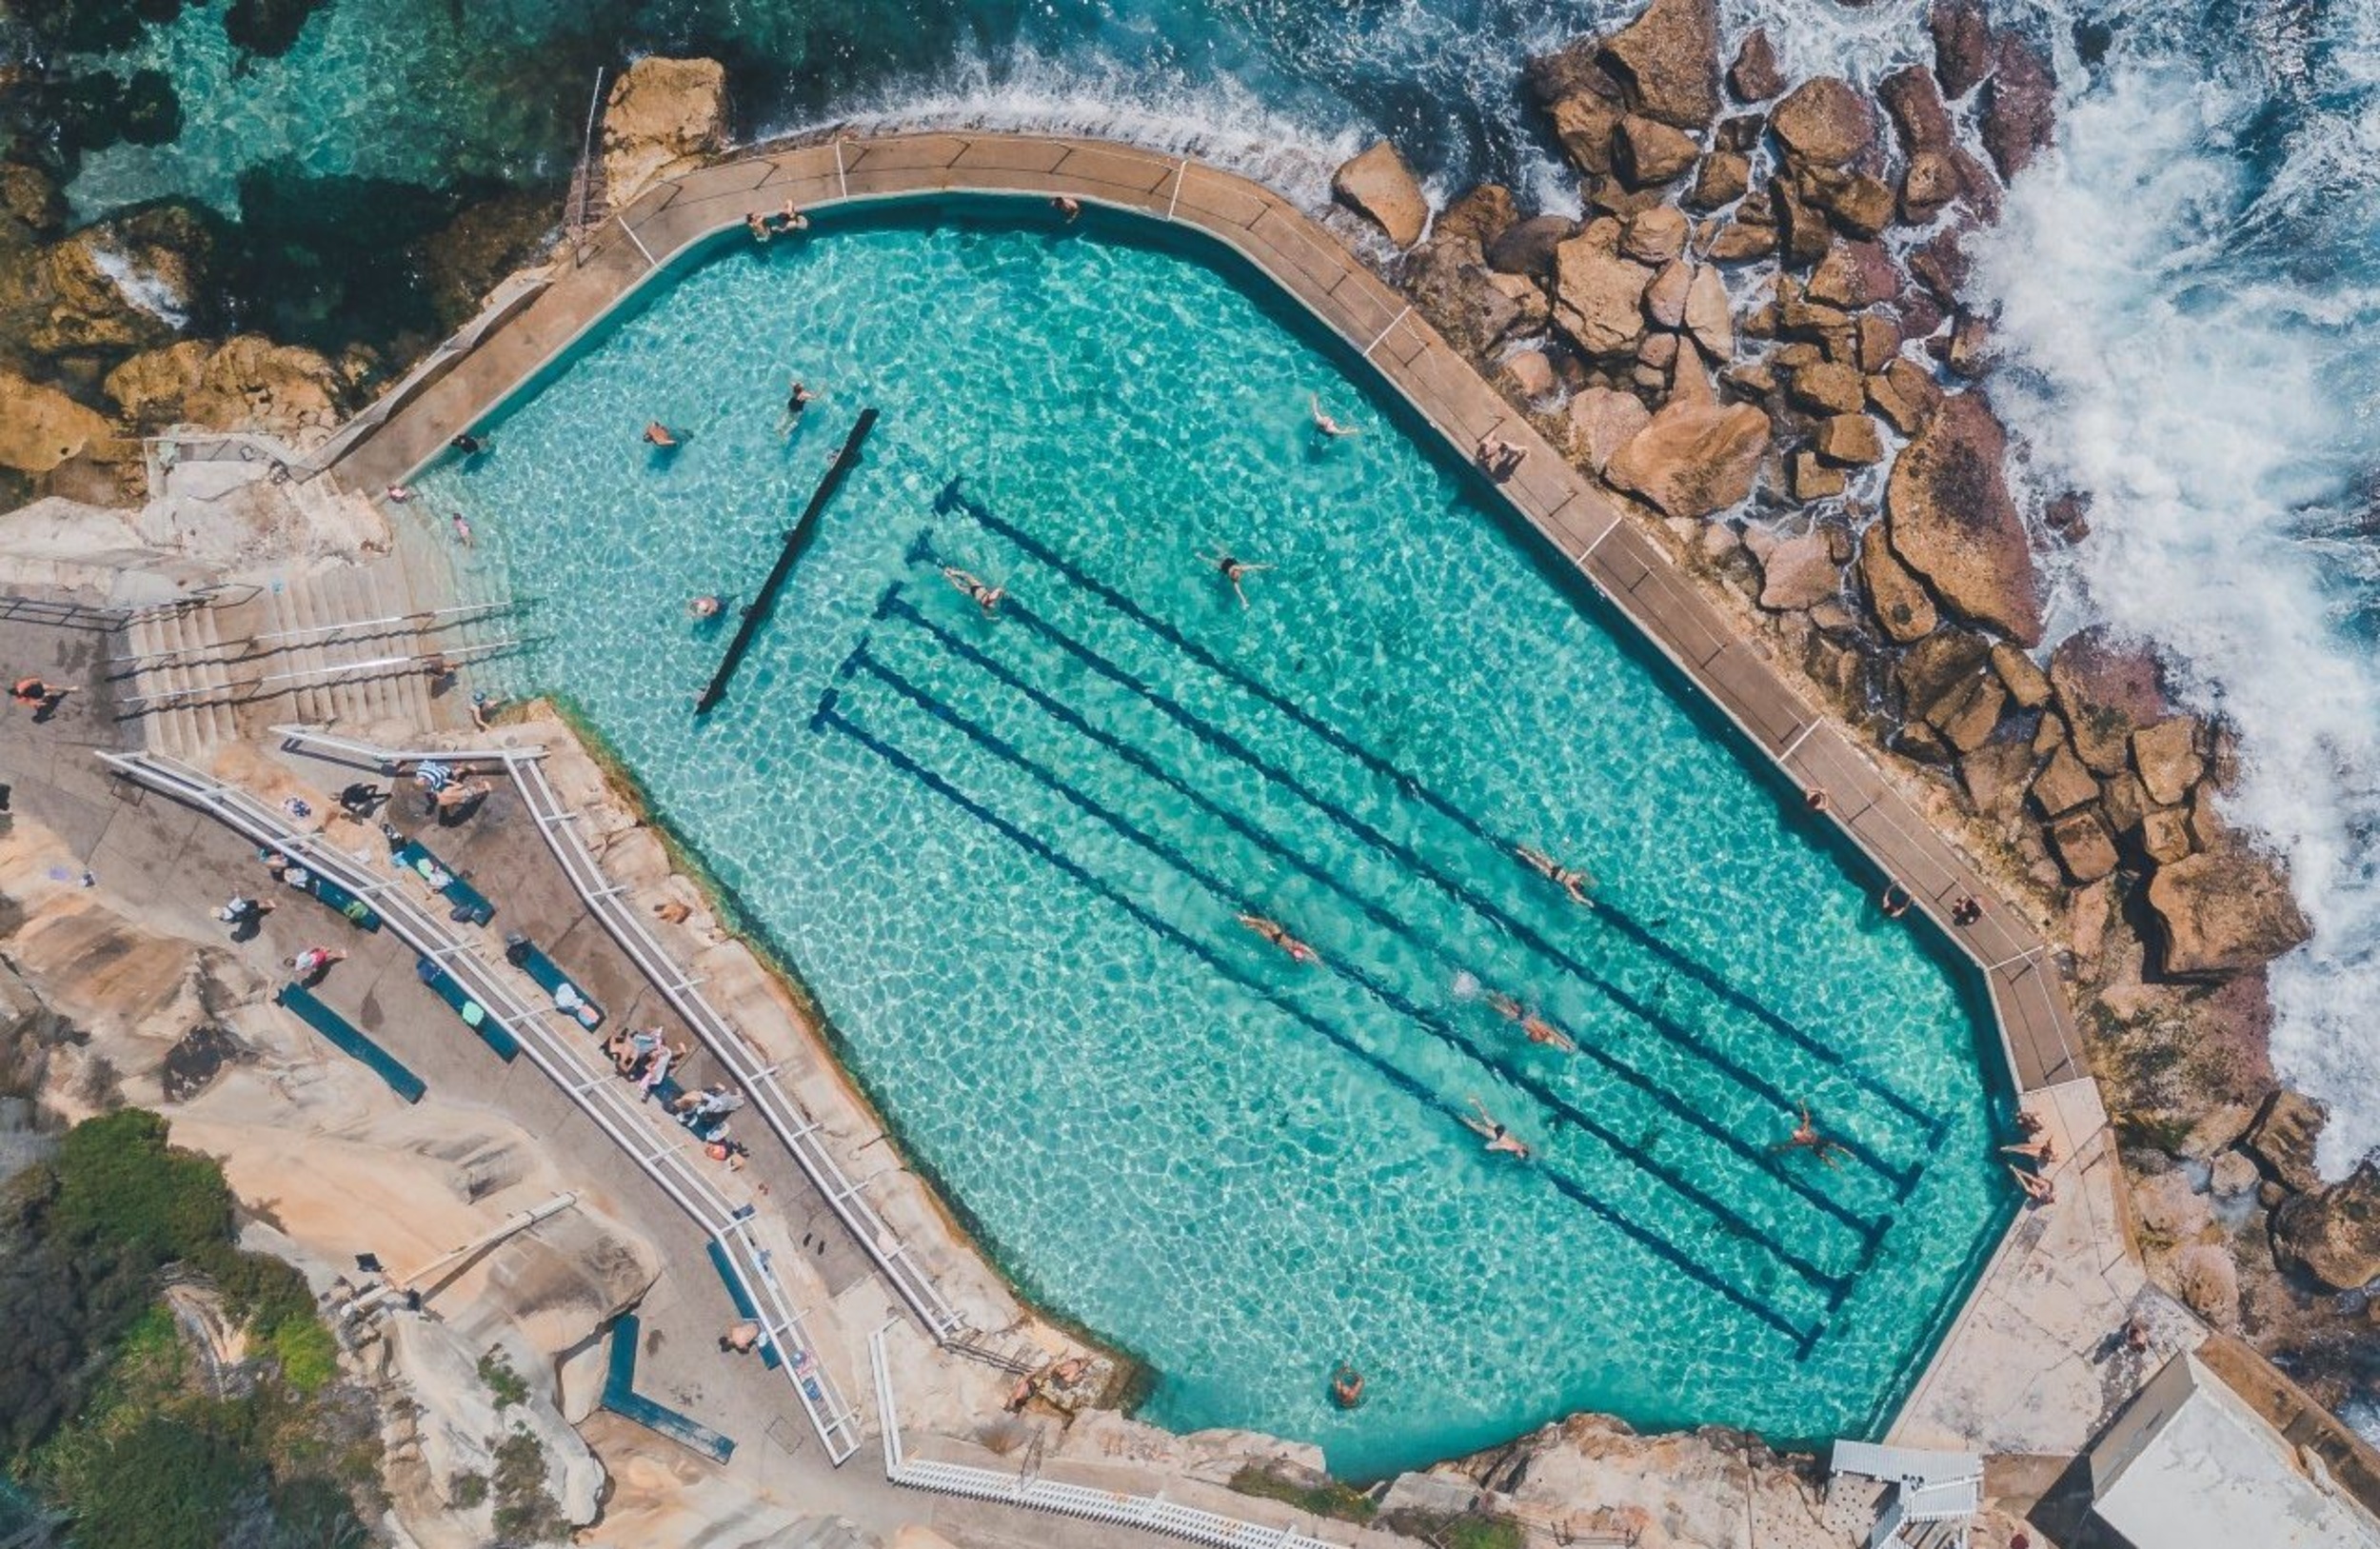 <p>It's a more rugged version of Bondi's Iceberg Pool, another swimming hole perched above the ocean. Bronte Baths is perfect for those looking to swim laps or lounge with a view. Either way, the pool is magnificently gorgeous.</p><p>You may also like: <a href='https://www.yardbarker.com/lifestyle/articles/20_essential_tips_for_decorating_on_a_budget/s1__35553035'>20 essential tips for decorating on a budget</a></p>